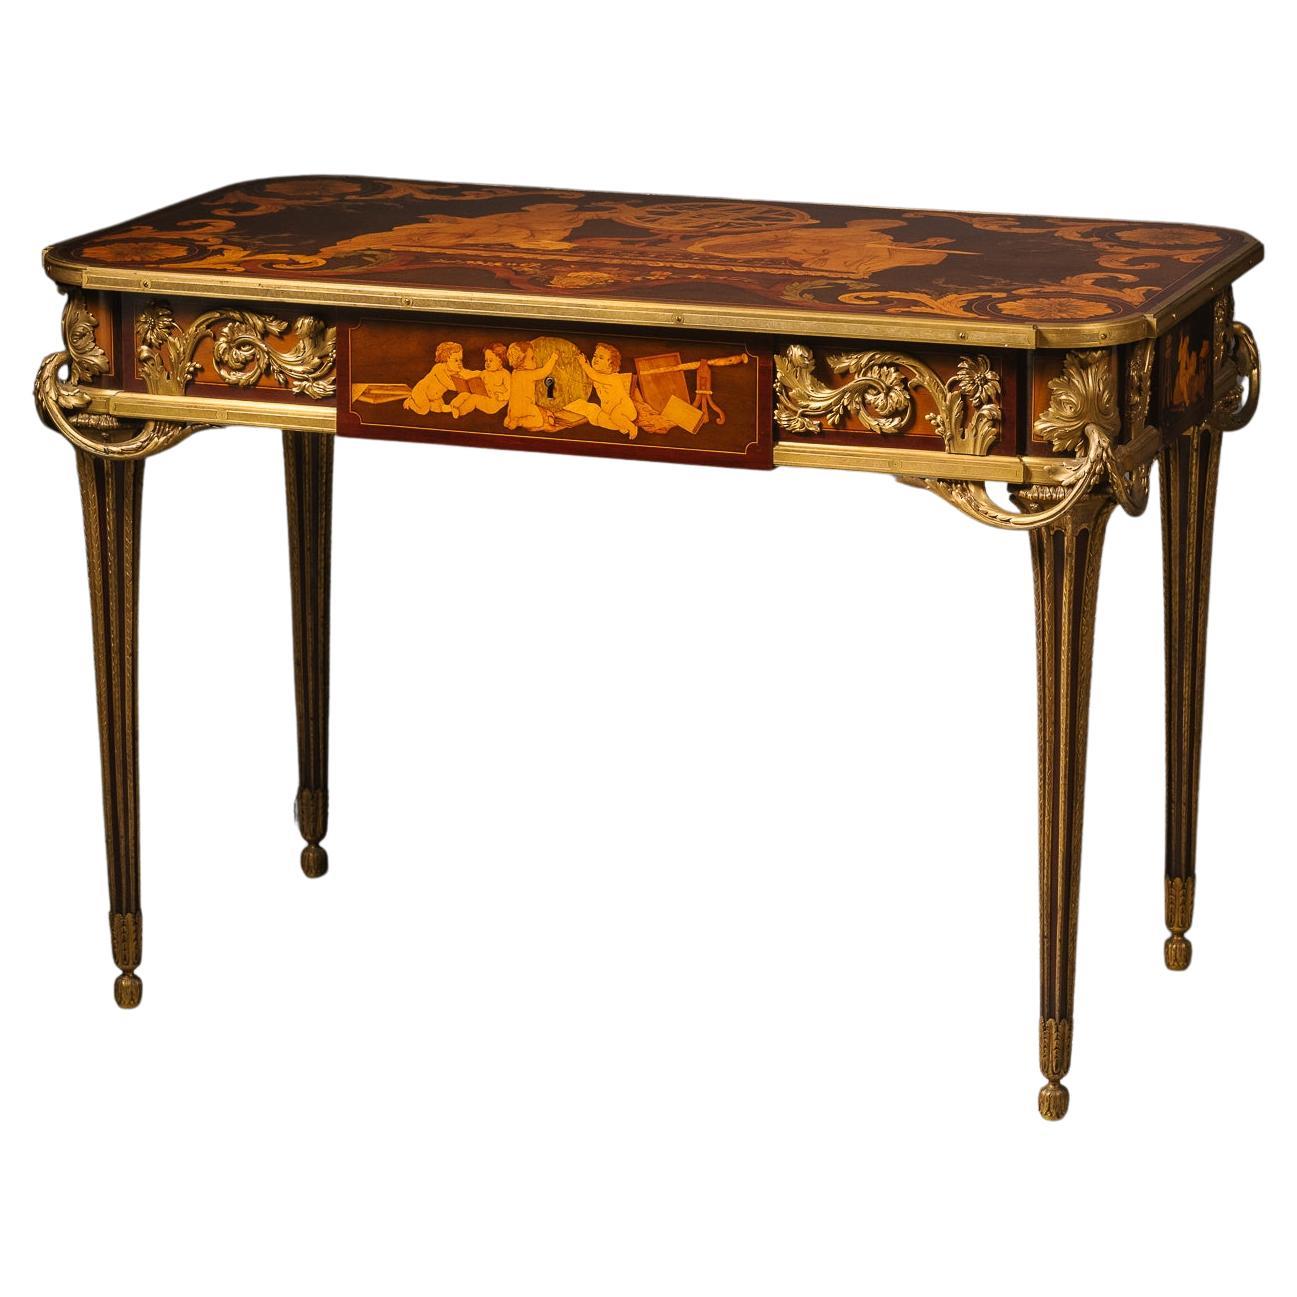 Louis XVI Style Gilt-Bronze Mounted Marquetry Centre Table by Beurdeley For Sale